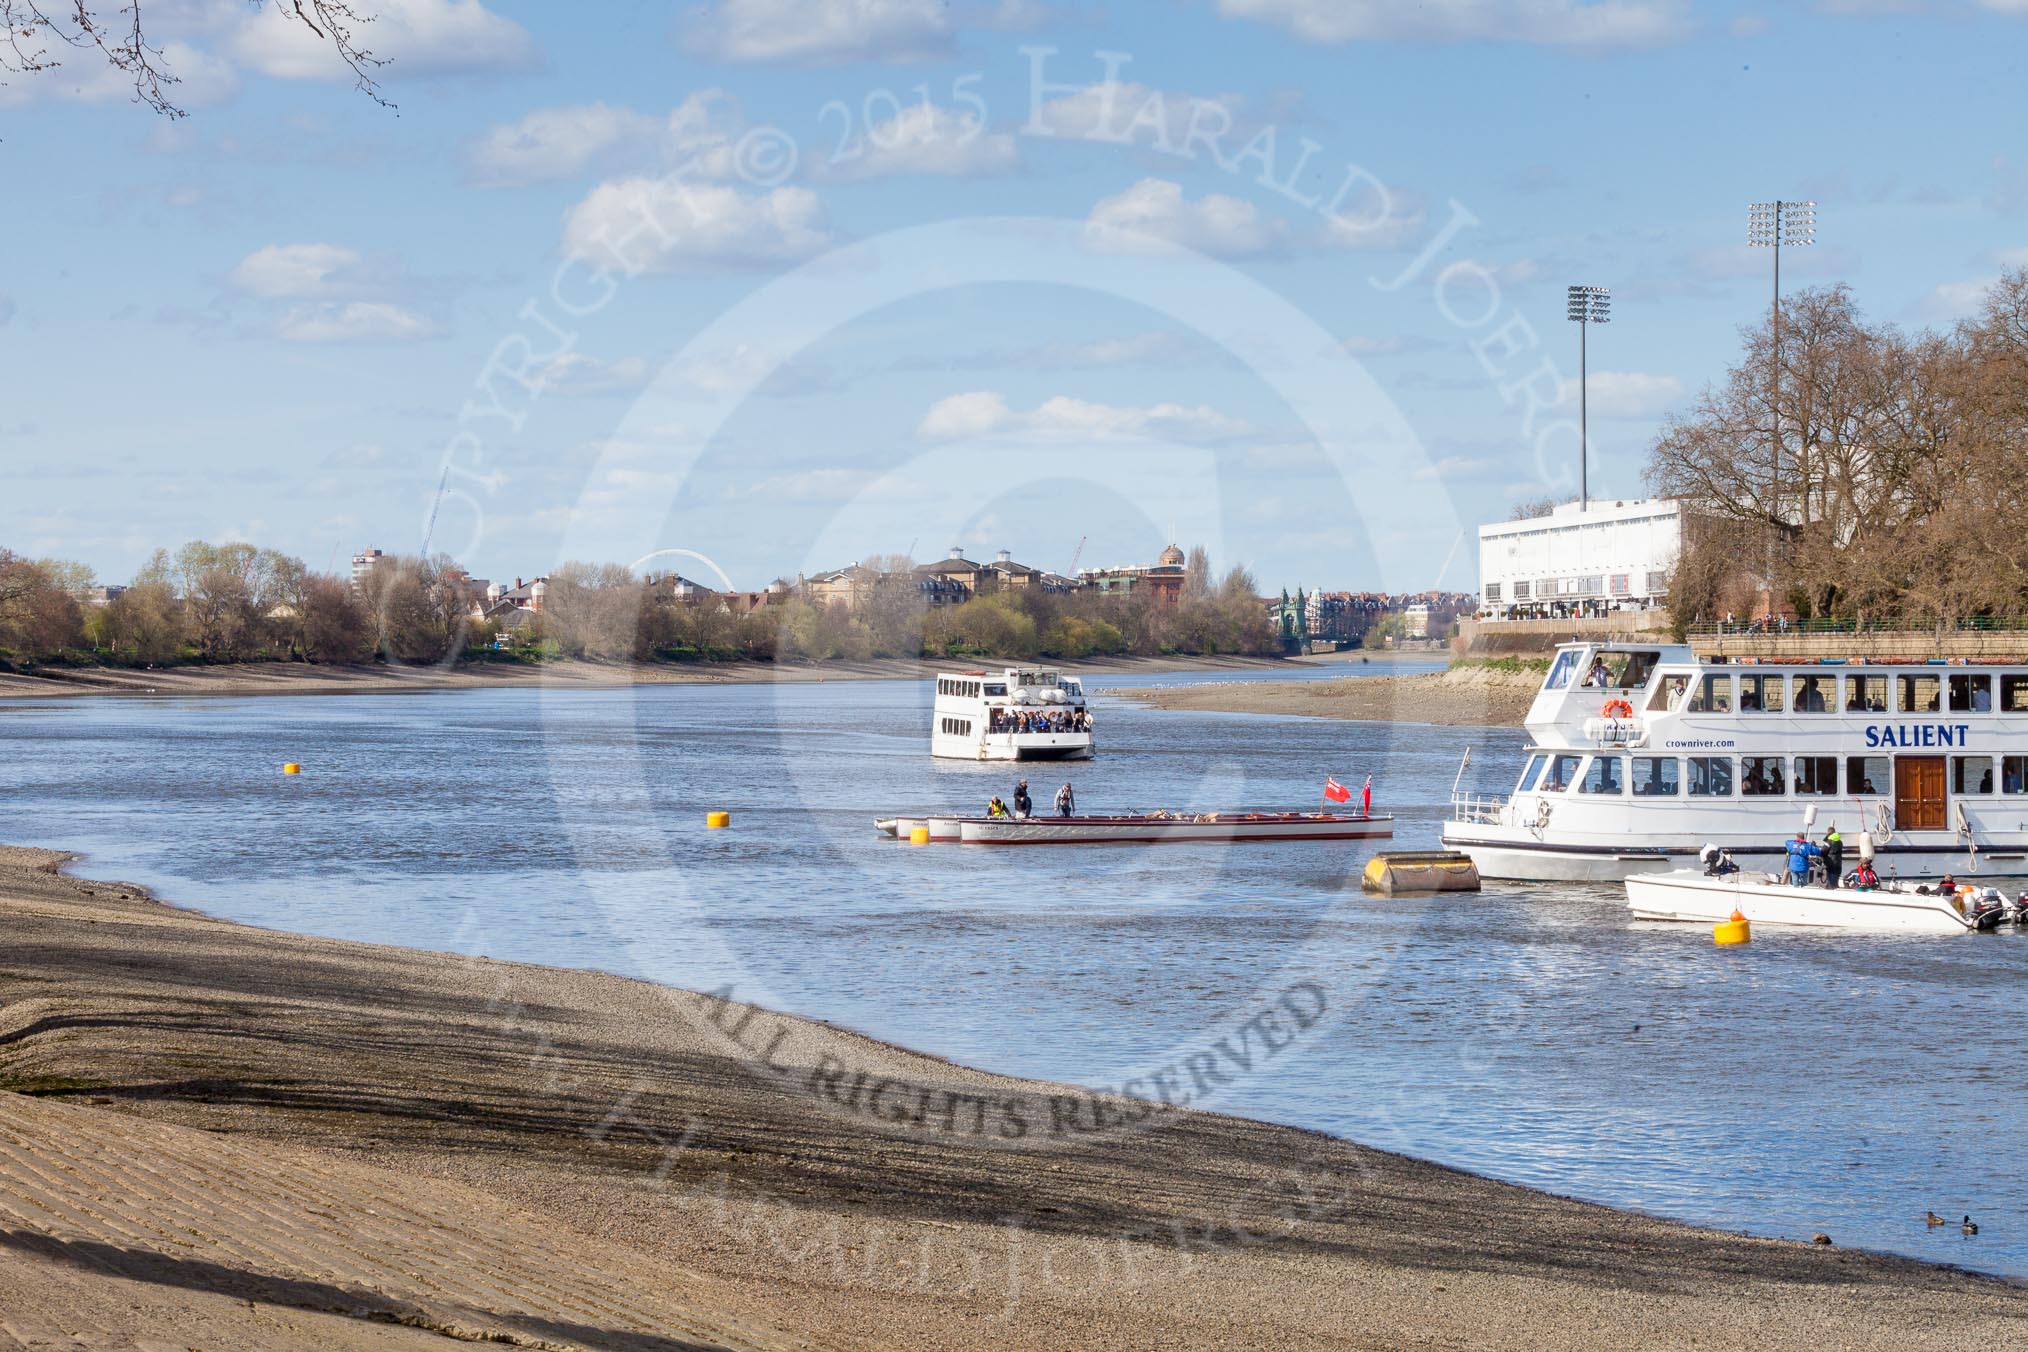 The Boat Race season 2015 - Newton Women's Boat Race.
River Thames between Putney and Mortlake,
London,

United Kingdom,
on 11 April 2015 at 15:19, image #54